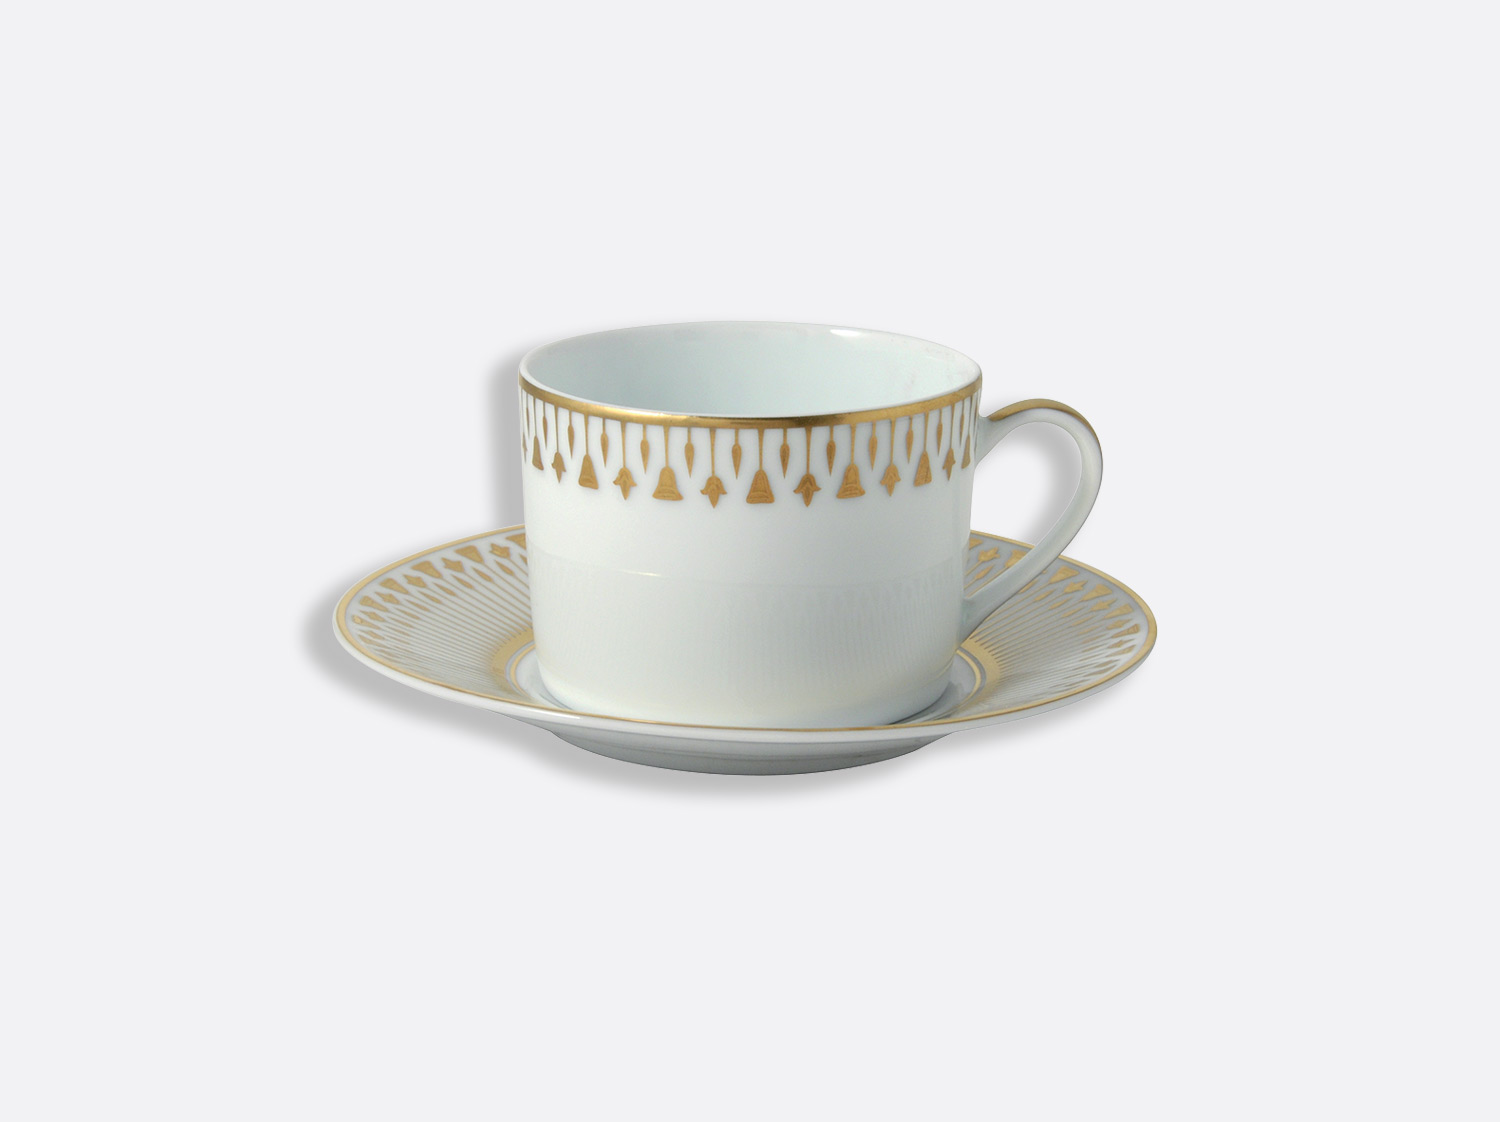 China Tea cup and saucer gift box - 5 Oz - Per unit of the collection Soleil levant | Bernardaud